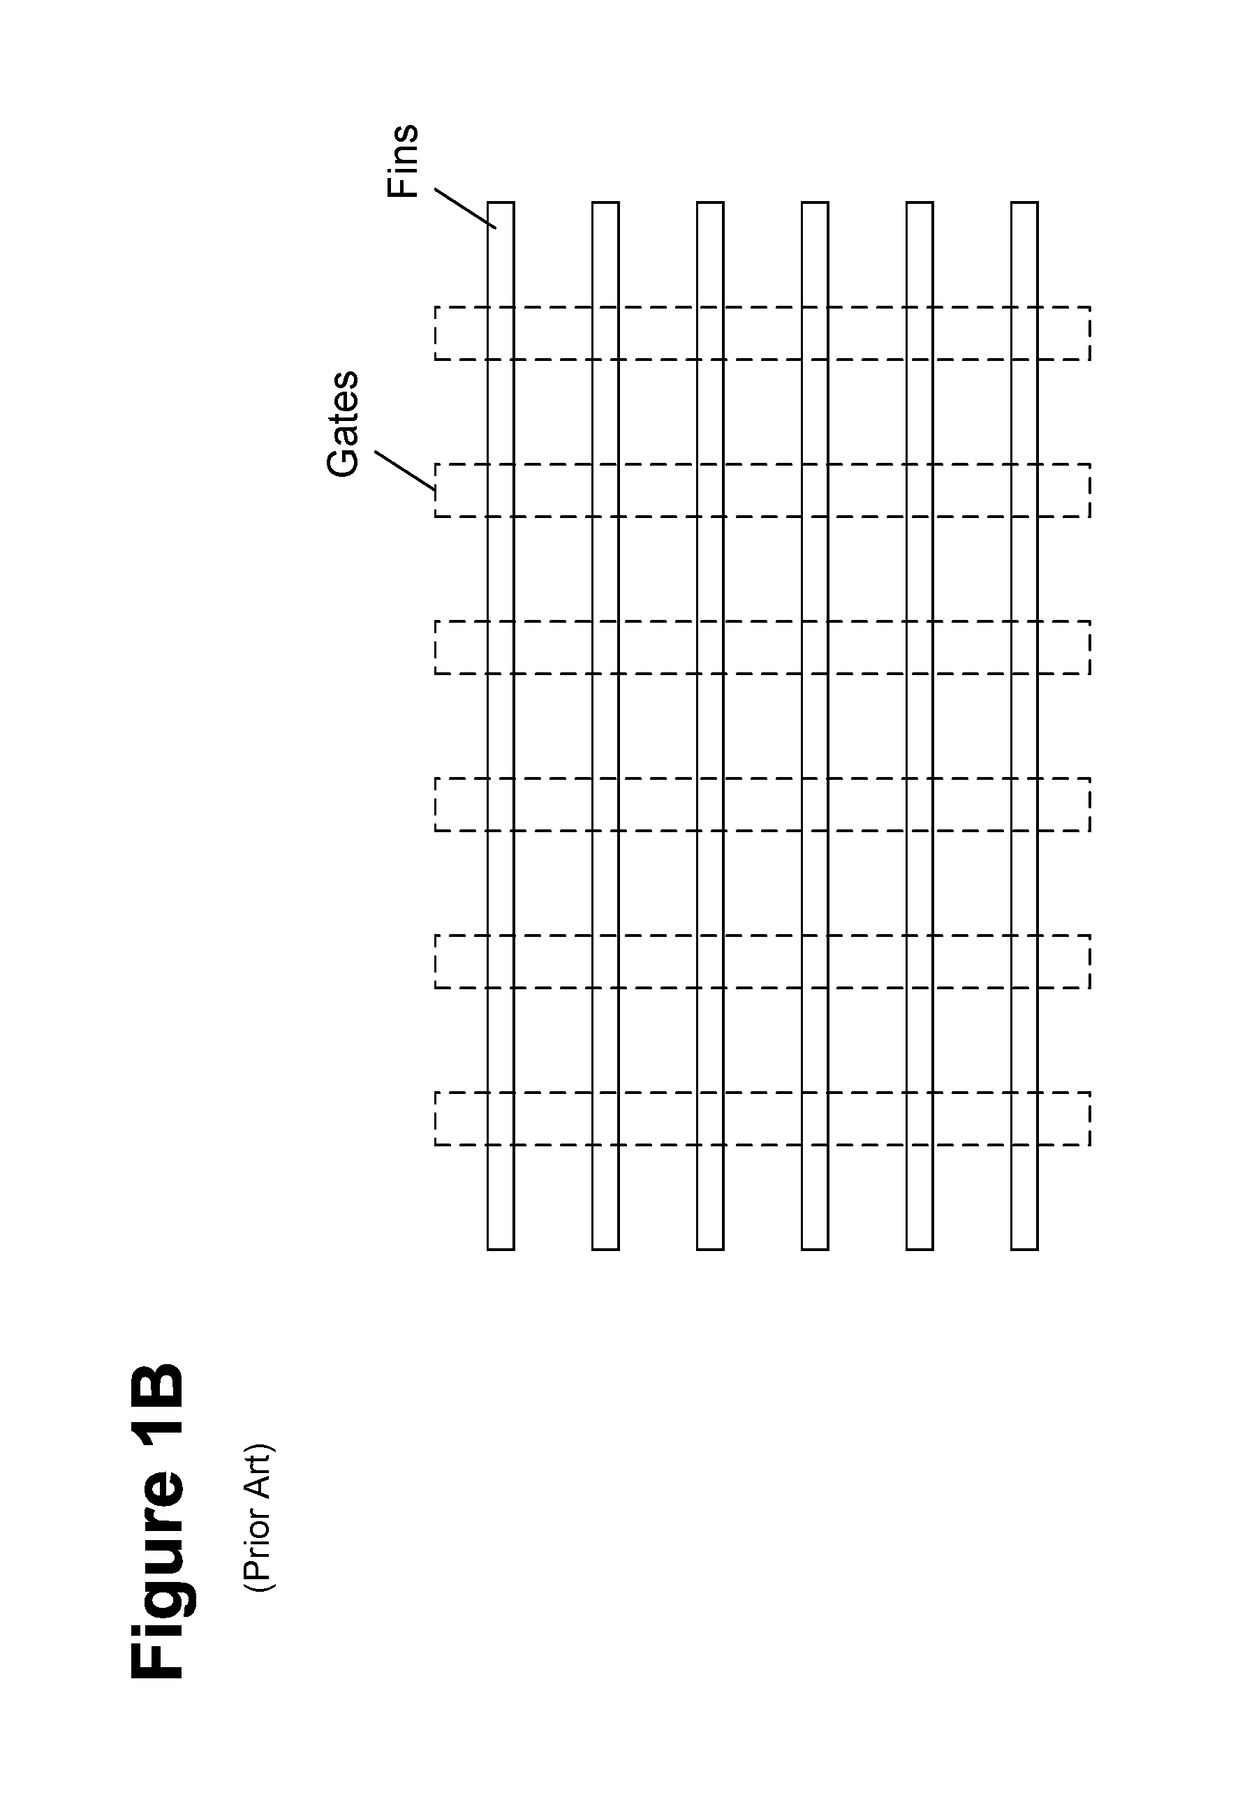 Methods of forming diffusion breaks on integrated circuit products comprised of finFET devices